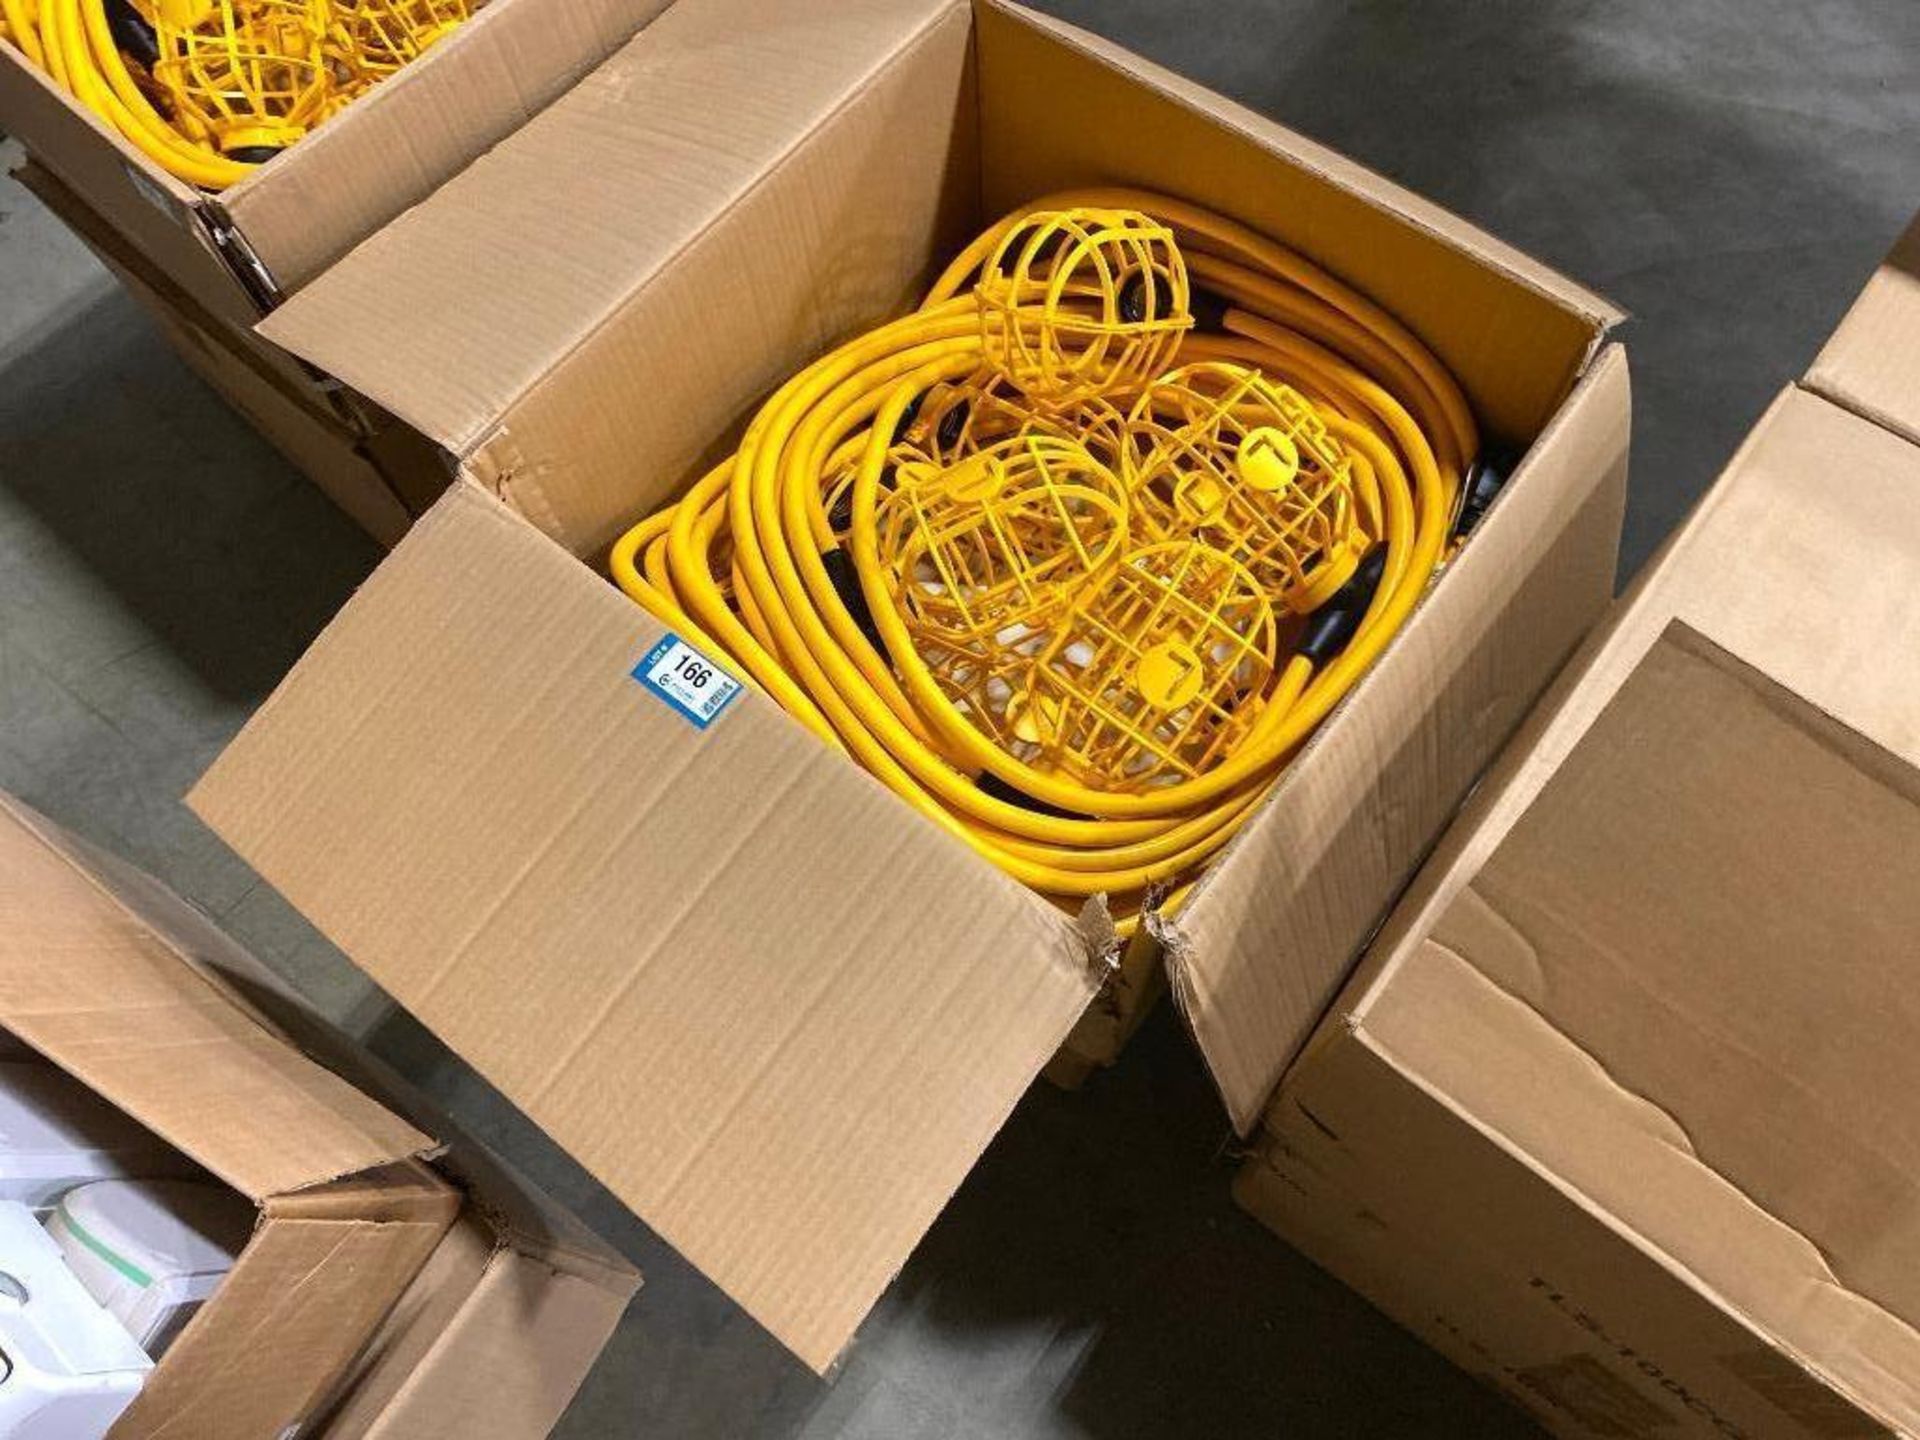 Lot of (2) Boxes of Lind Equipment String Lighting, TLS-100CG - Image 3 of 6